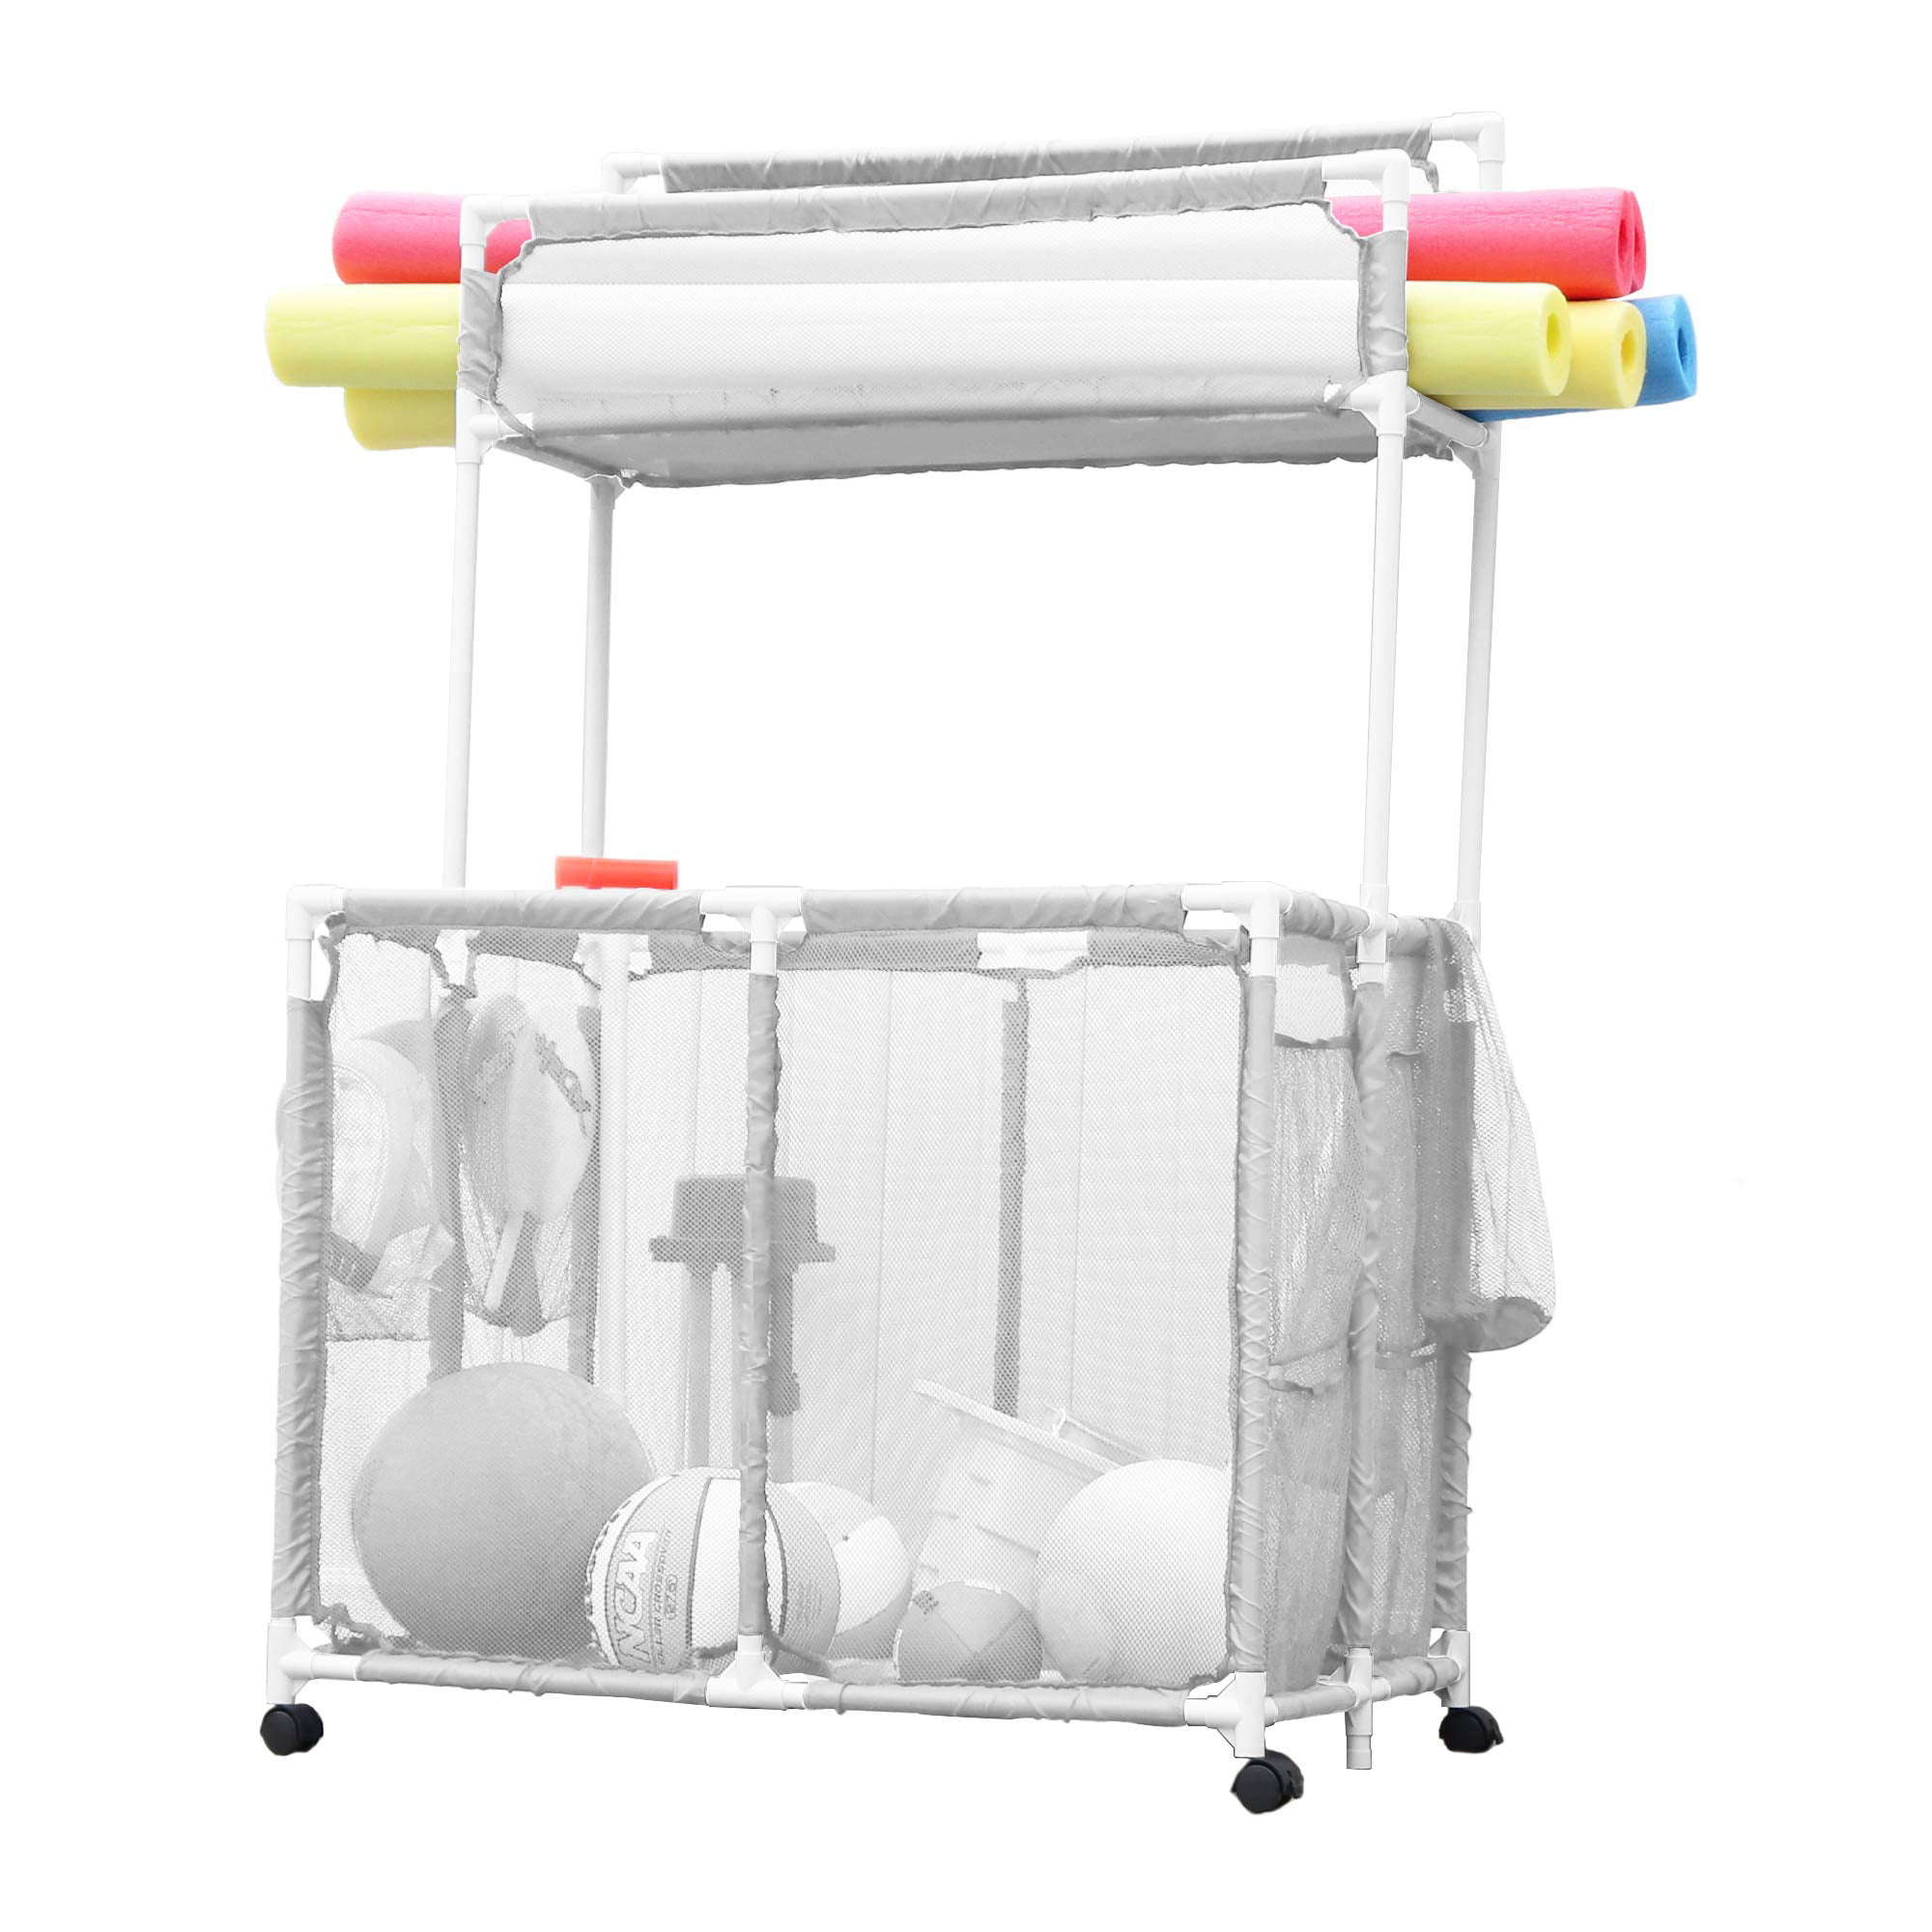 Balls and Floats Equipment Mesh Rolling Storage Organizer Bin XXL Blue Mesh / White PVC Essentially Yours Pool Noodles Holder Floats Toys 50x 32x 36 